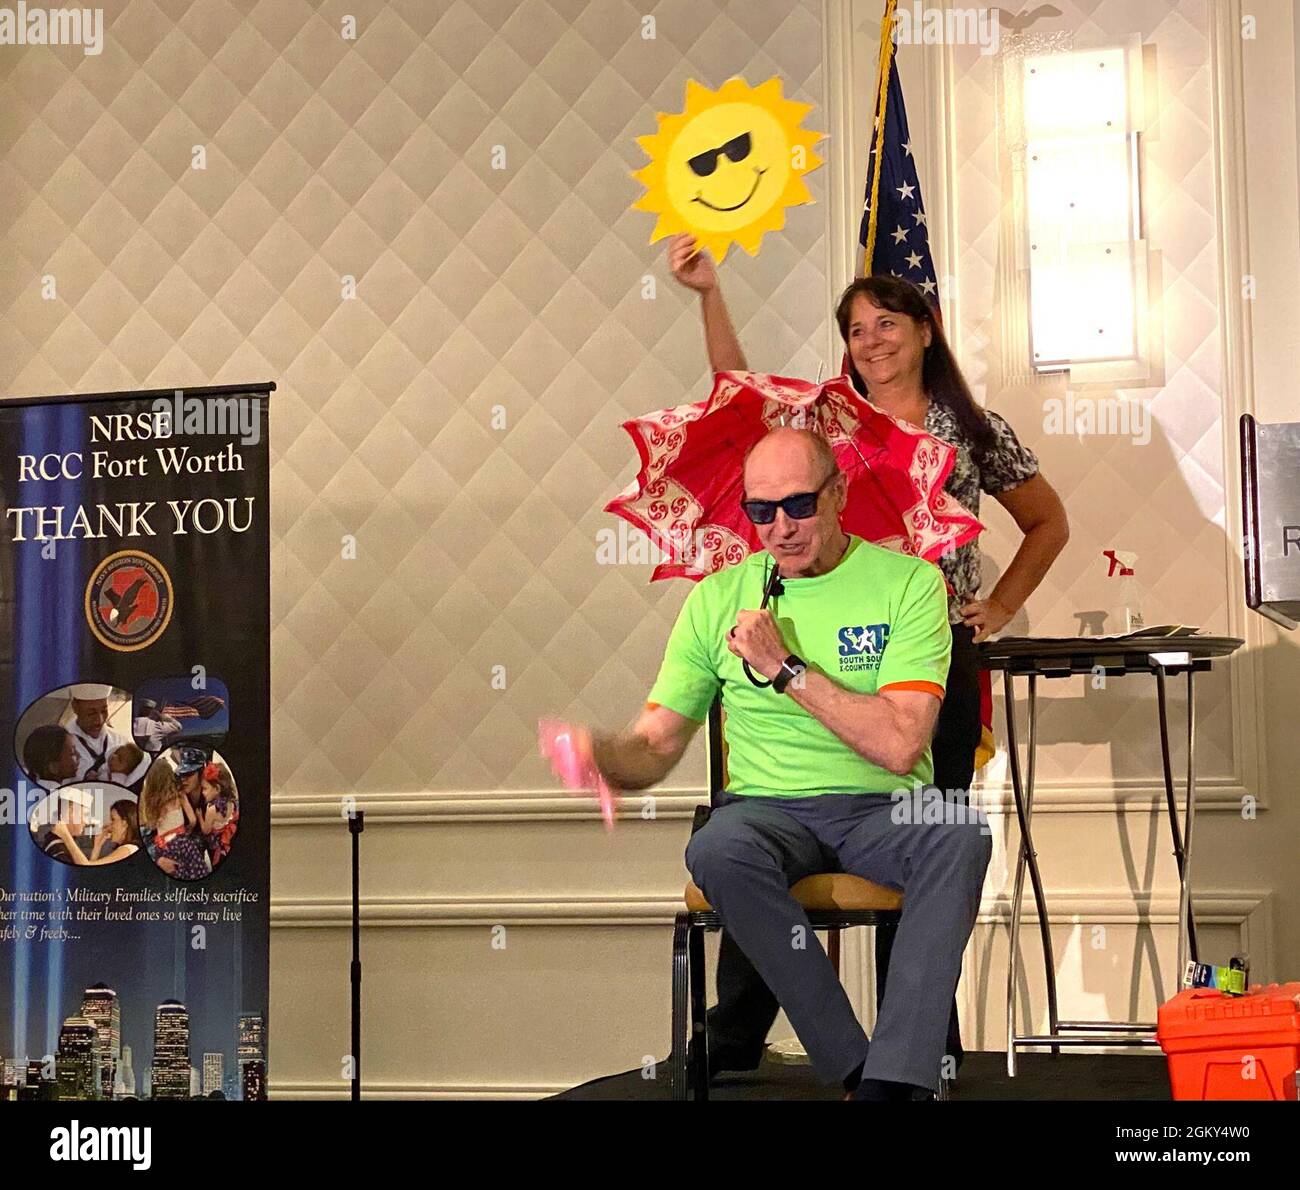 210724-N-FR750-5577 AUSTIN, Texas (July 24, 2021) – Presenter and retired Navy Capt. Christopher Staeheli with assistant Karen Alexandrou use props and humor to illustrate Operational Stress cycles during a session of the Returning Warrior Workshop (RWW) in Austin, TX, July 23-25. Returning Warrior Workshops are a component of the Yellow Ribbon Reintegration Program designed to honor service members and their families while helping the transition of Active and Reserve Component Sailors returning from deployments and individual augments. Stock Photo